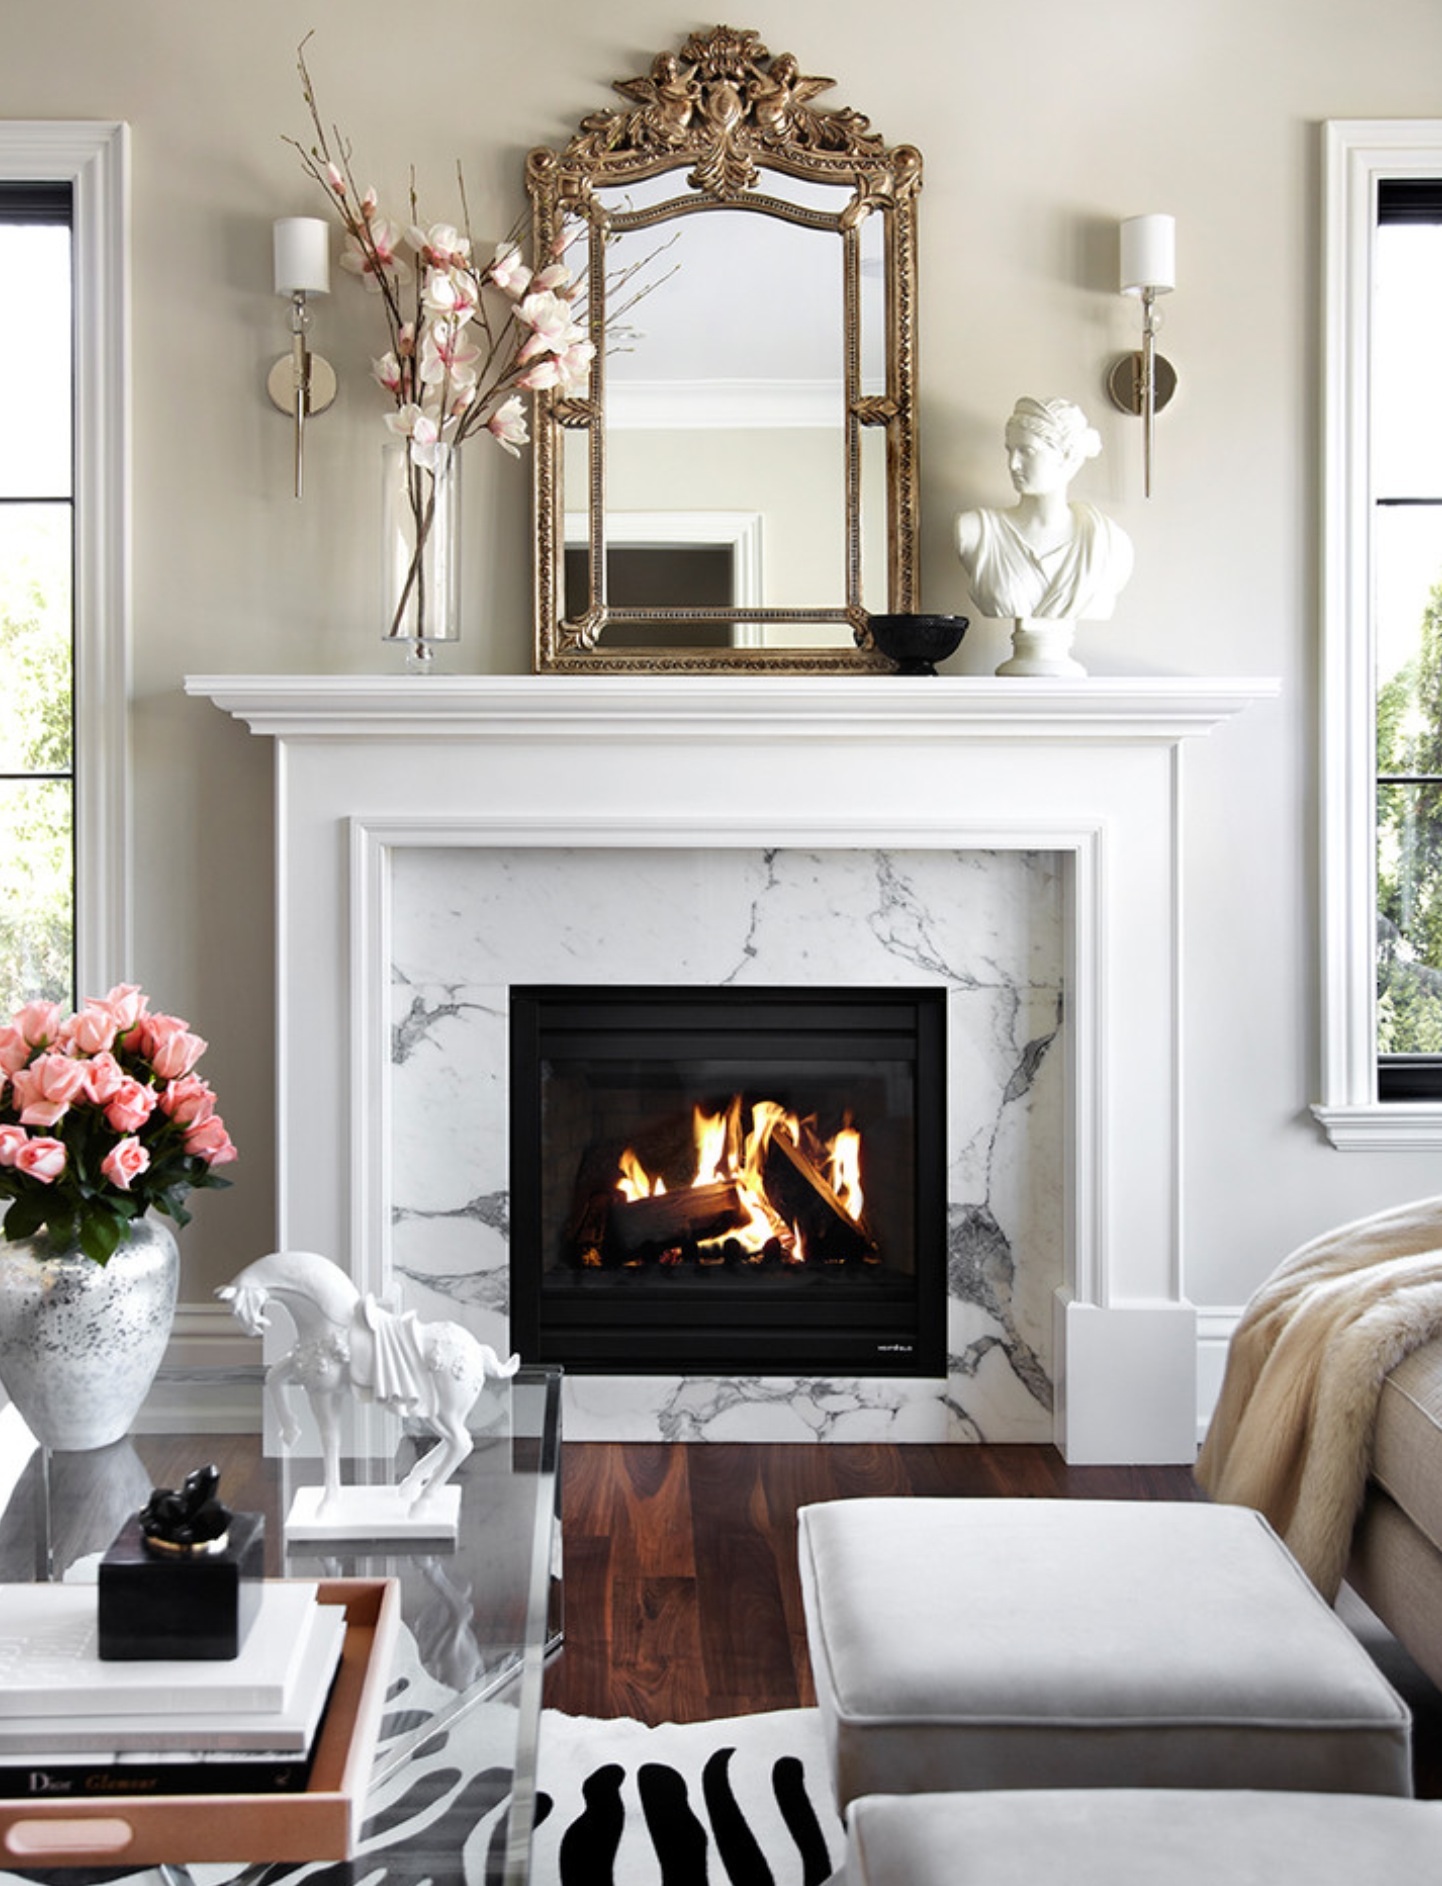 40 Beautiful Living Room Designs With Fireplace - Interior ...